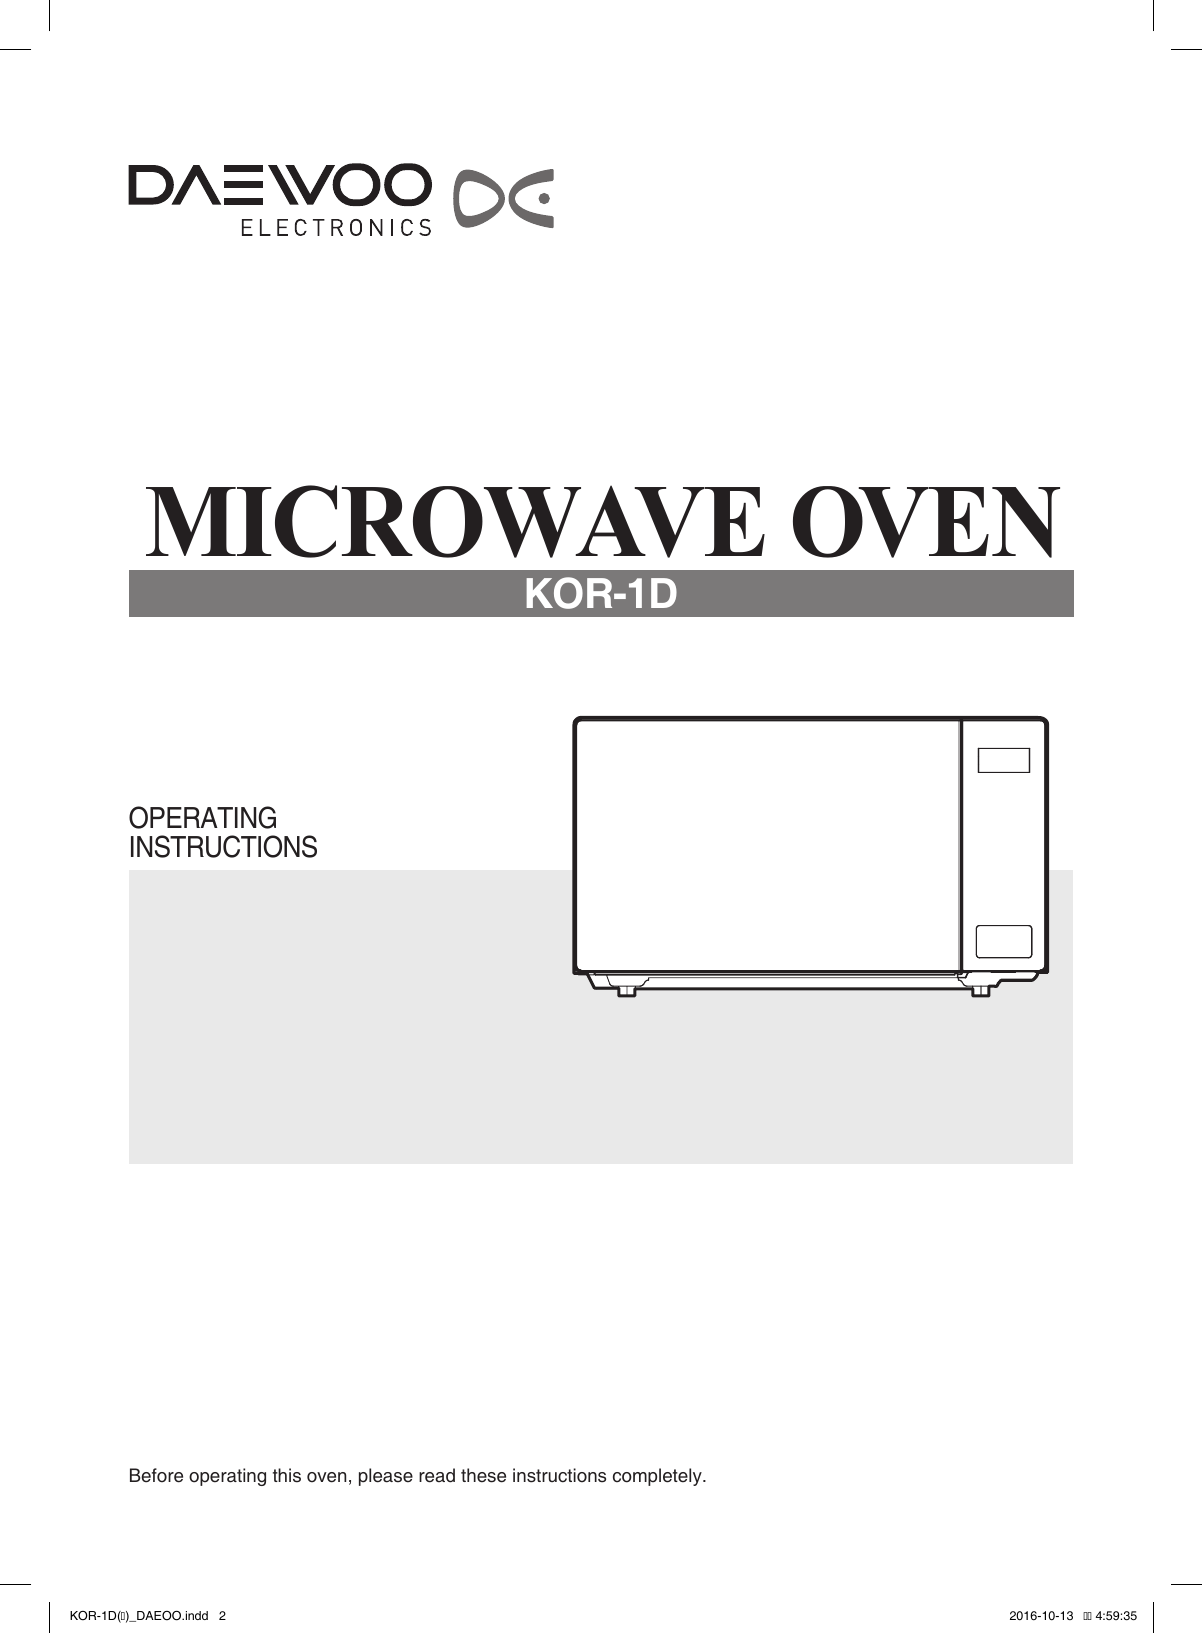 OPERATINGINSTRUCTIONSKOR-1DBefore operating this oven, please read these instructions completely.MICROWAVE OVENKOR-1D(�)_DAEOO.indd   2 2016-10-13   �� 4:59:35